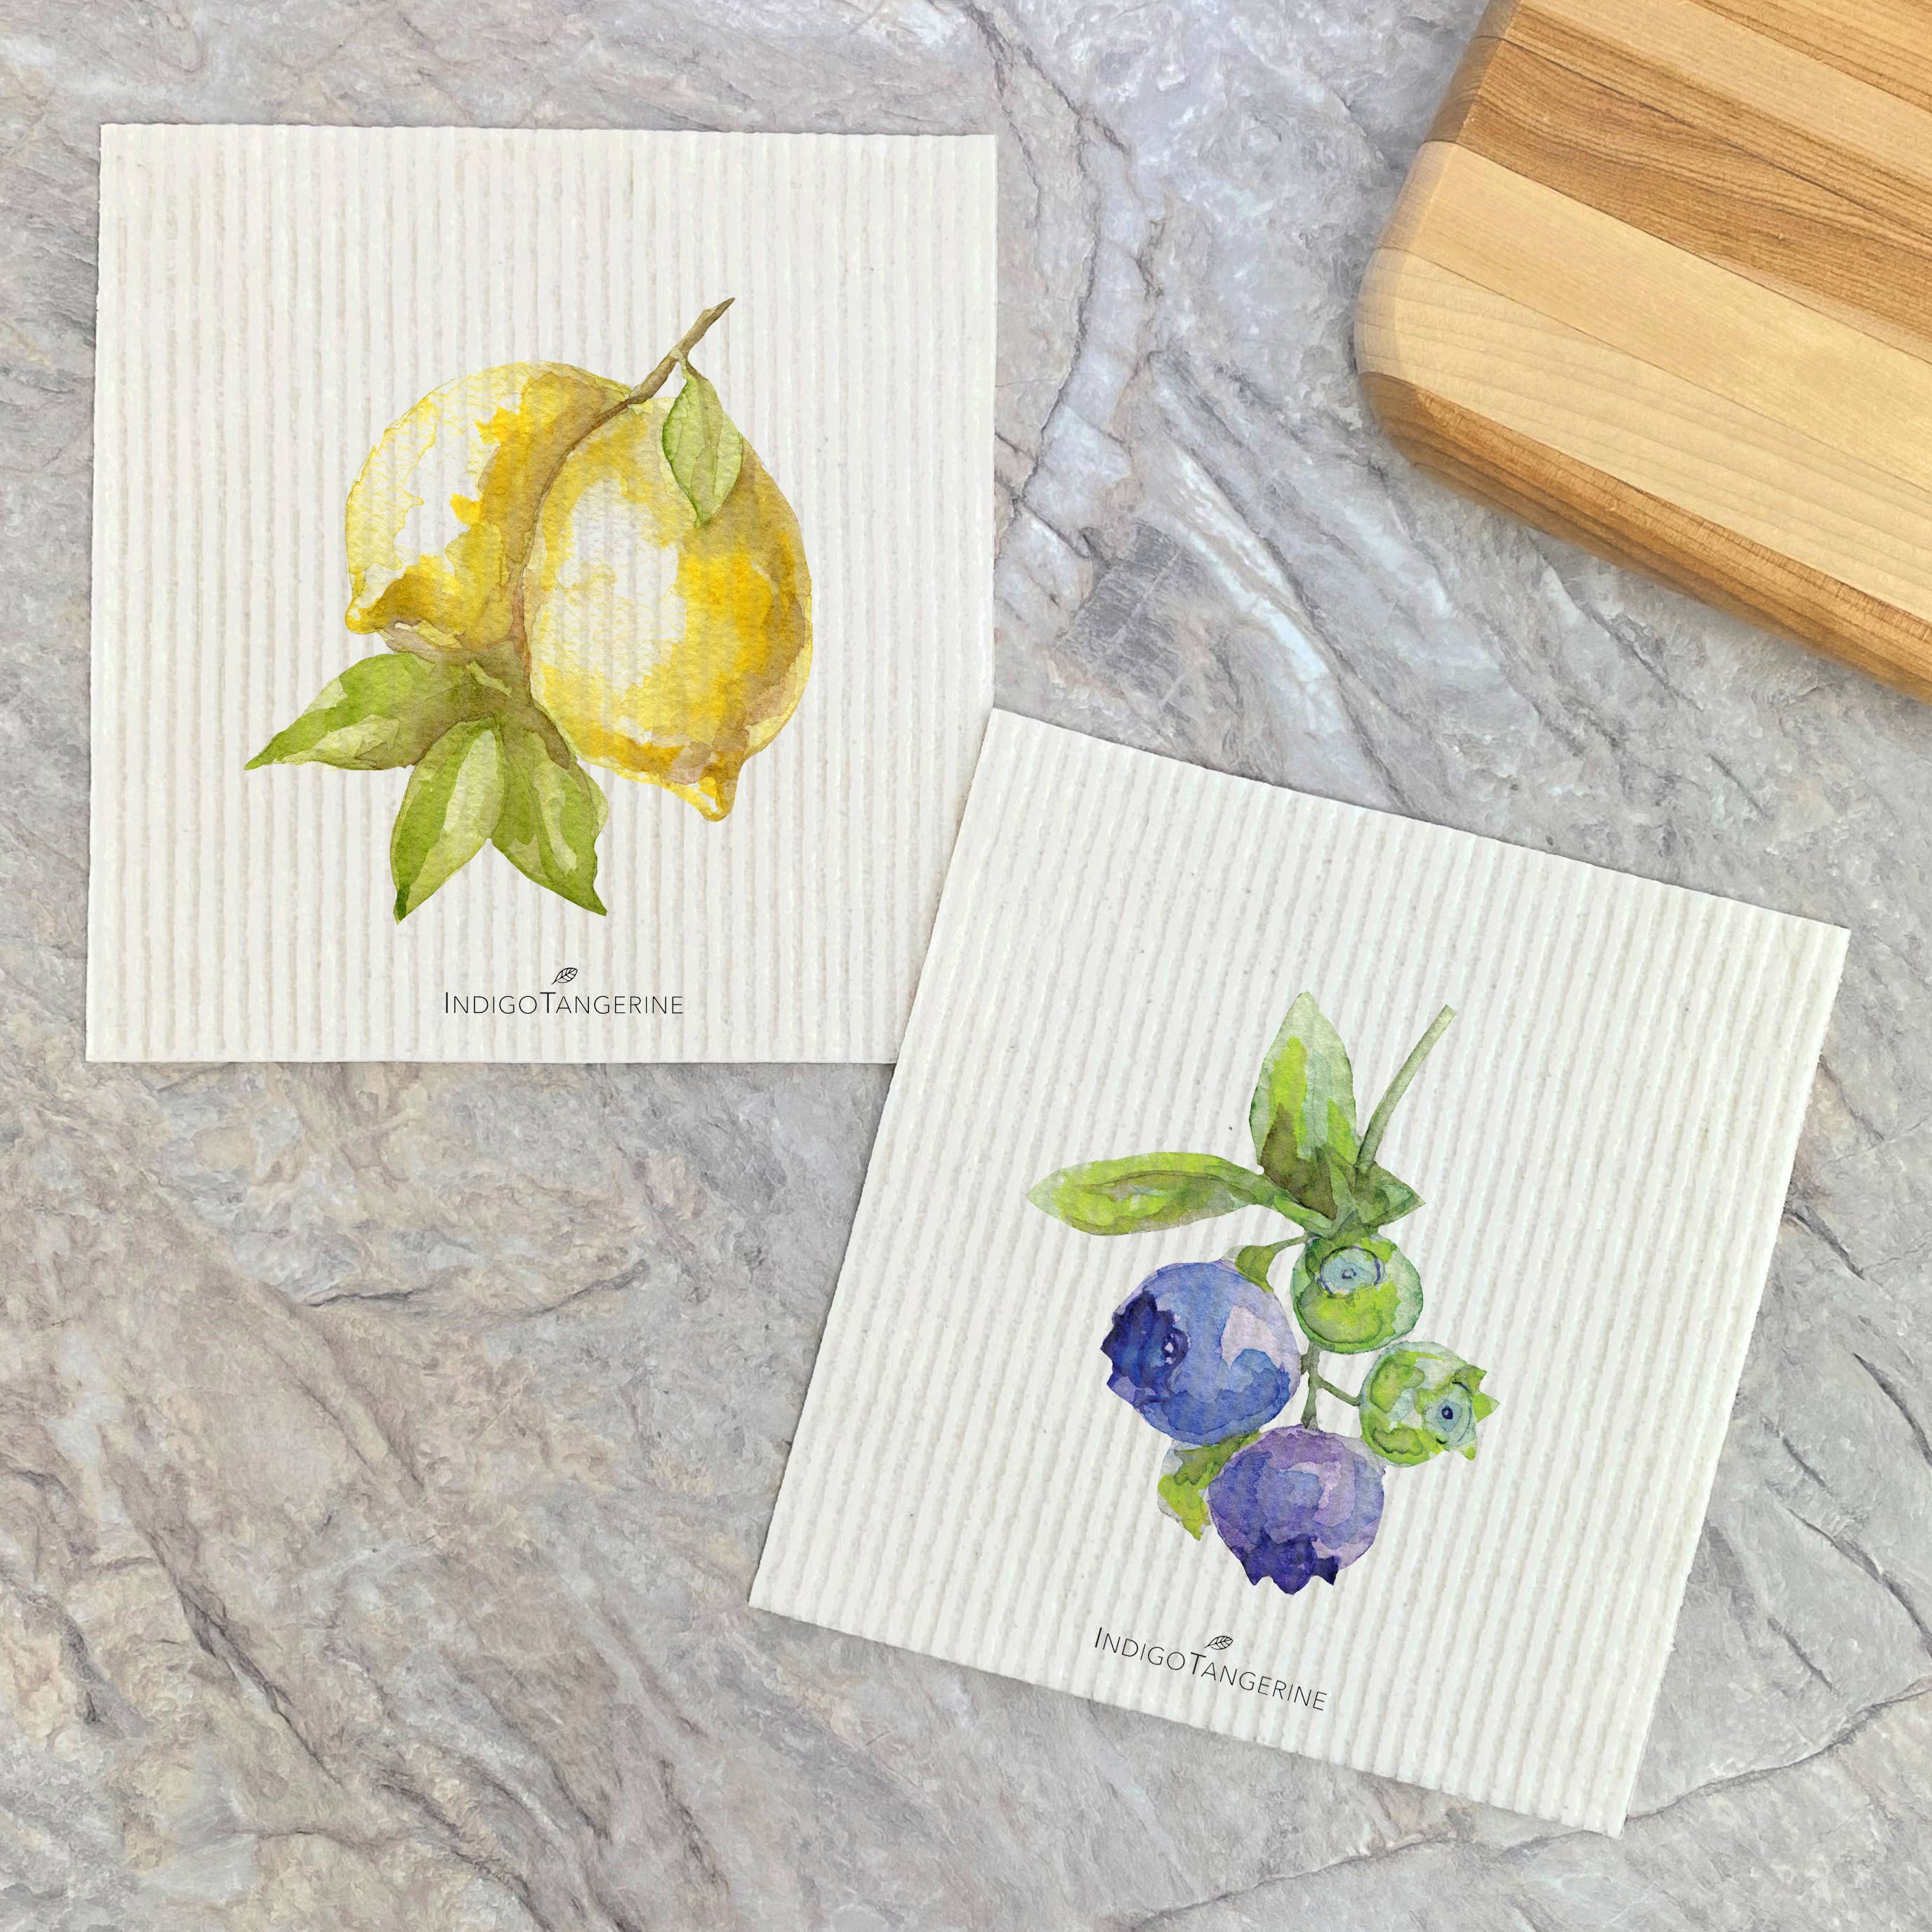 Ditch paper, embrace eco-chic! Lemons & Blueberries Swedish Dishcloths (2-pack). Plant-based, compostable, reusable, adorable! Sustainable cleaning for your happy kitchen. Shop American Life Brands now!